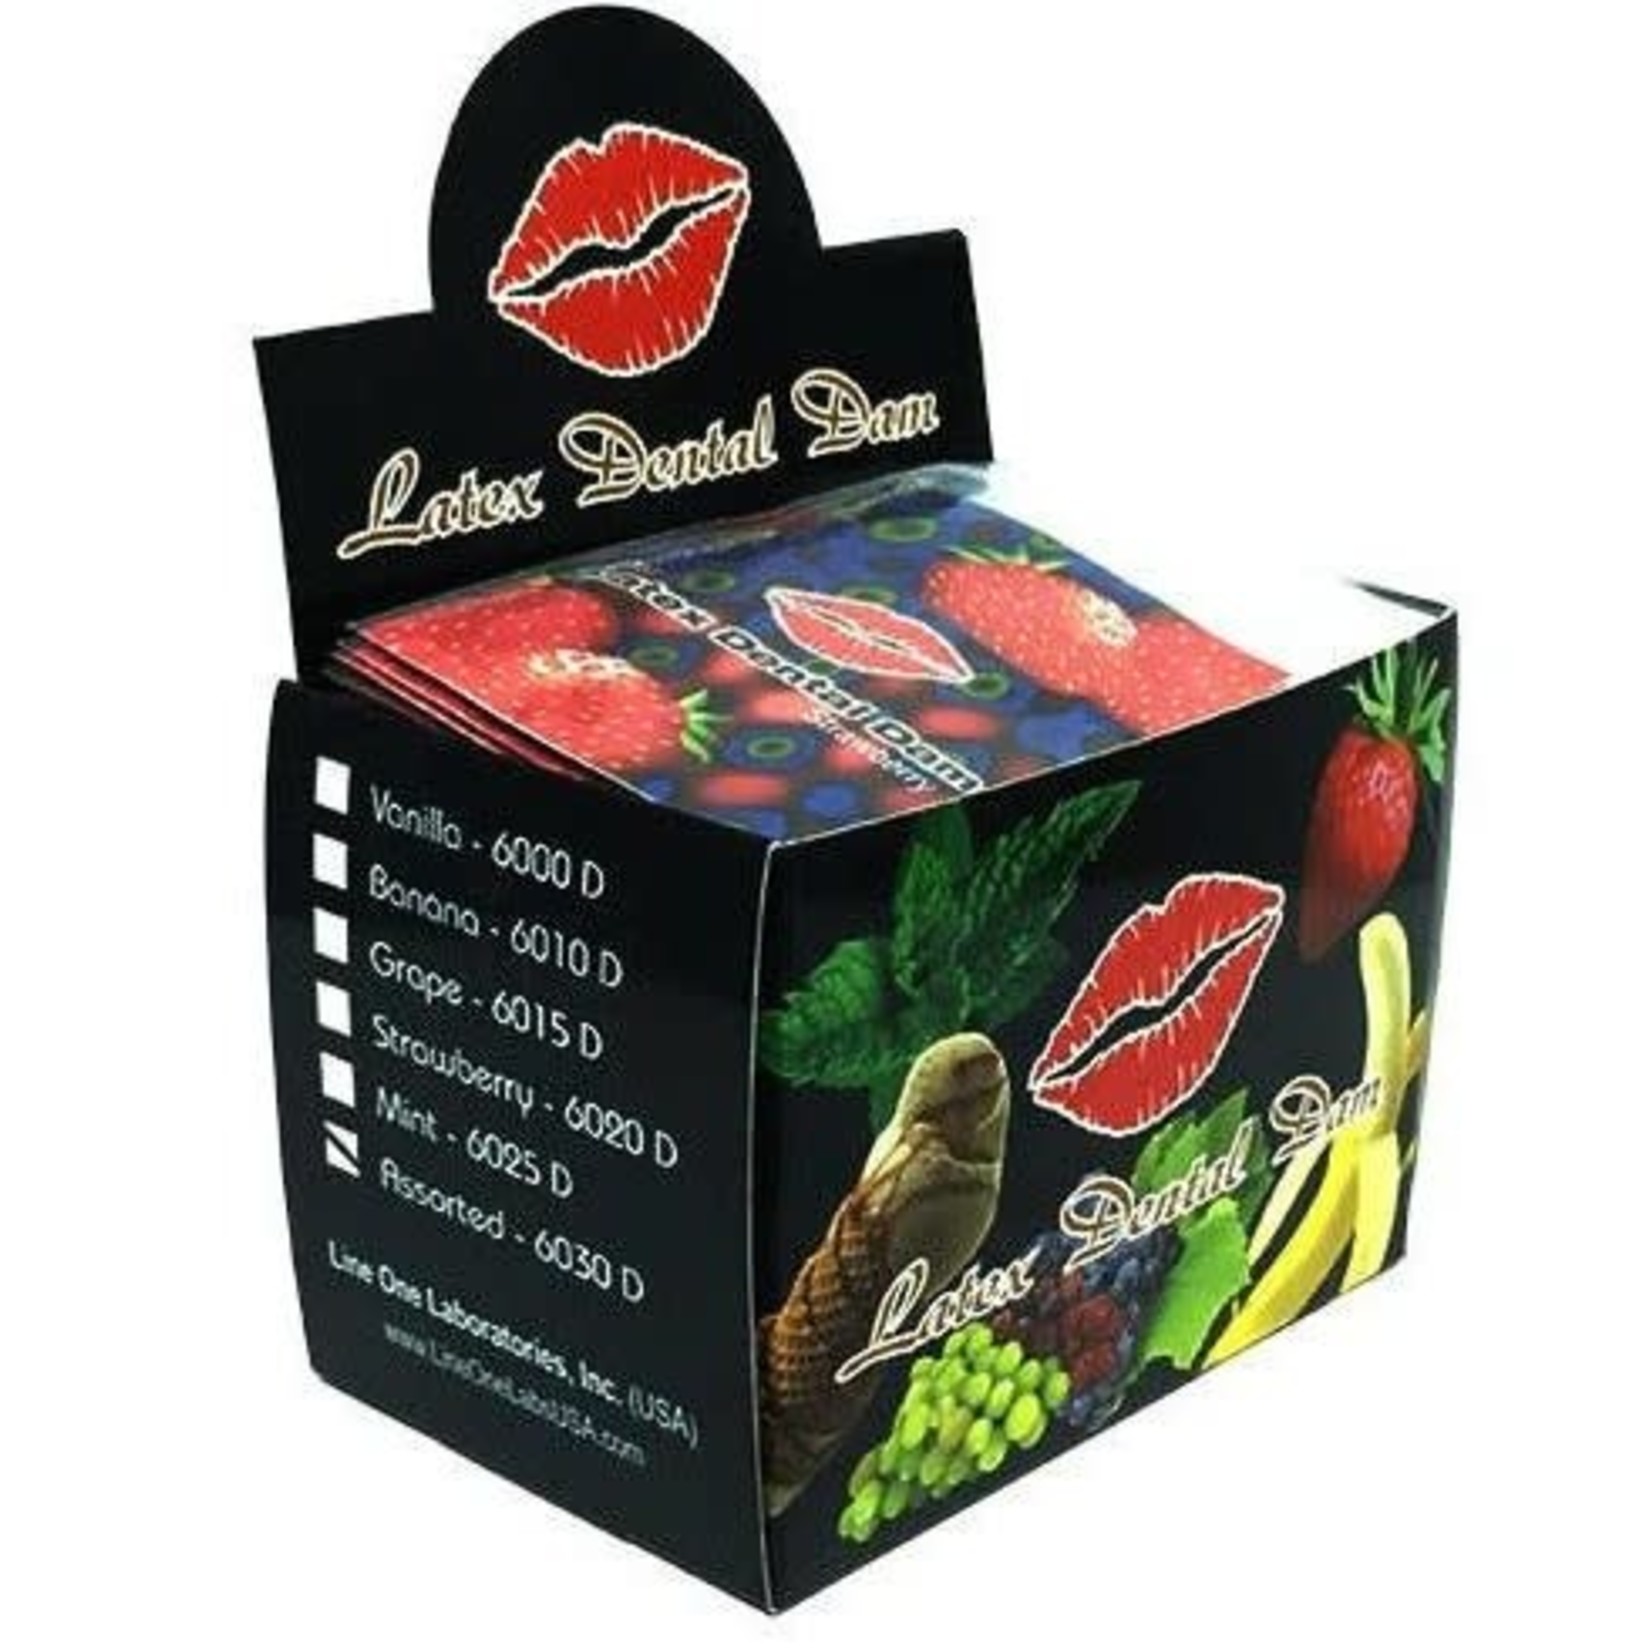 LATEX DENTAL DAM - ASSORTED FLAVOURS